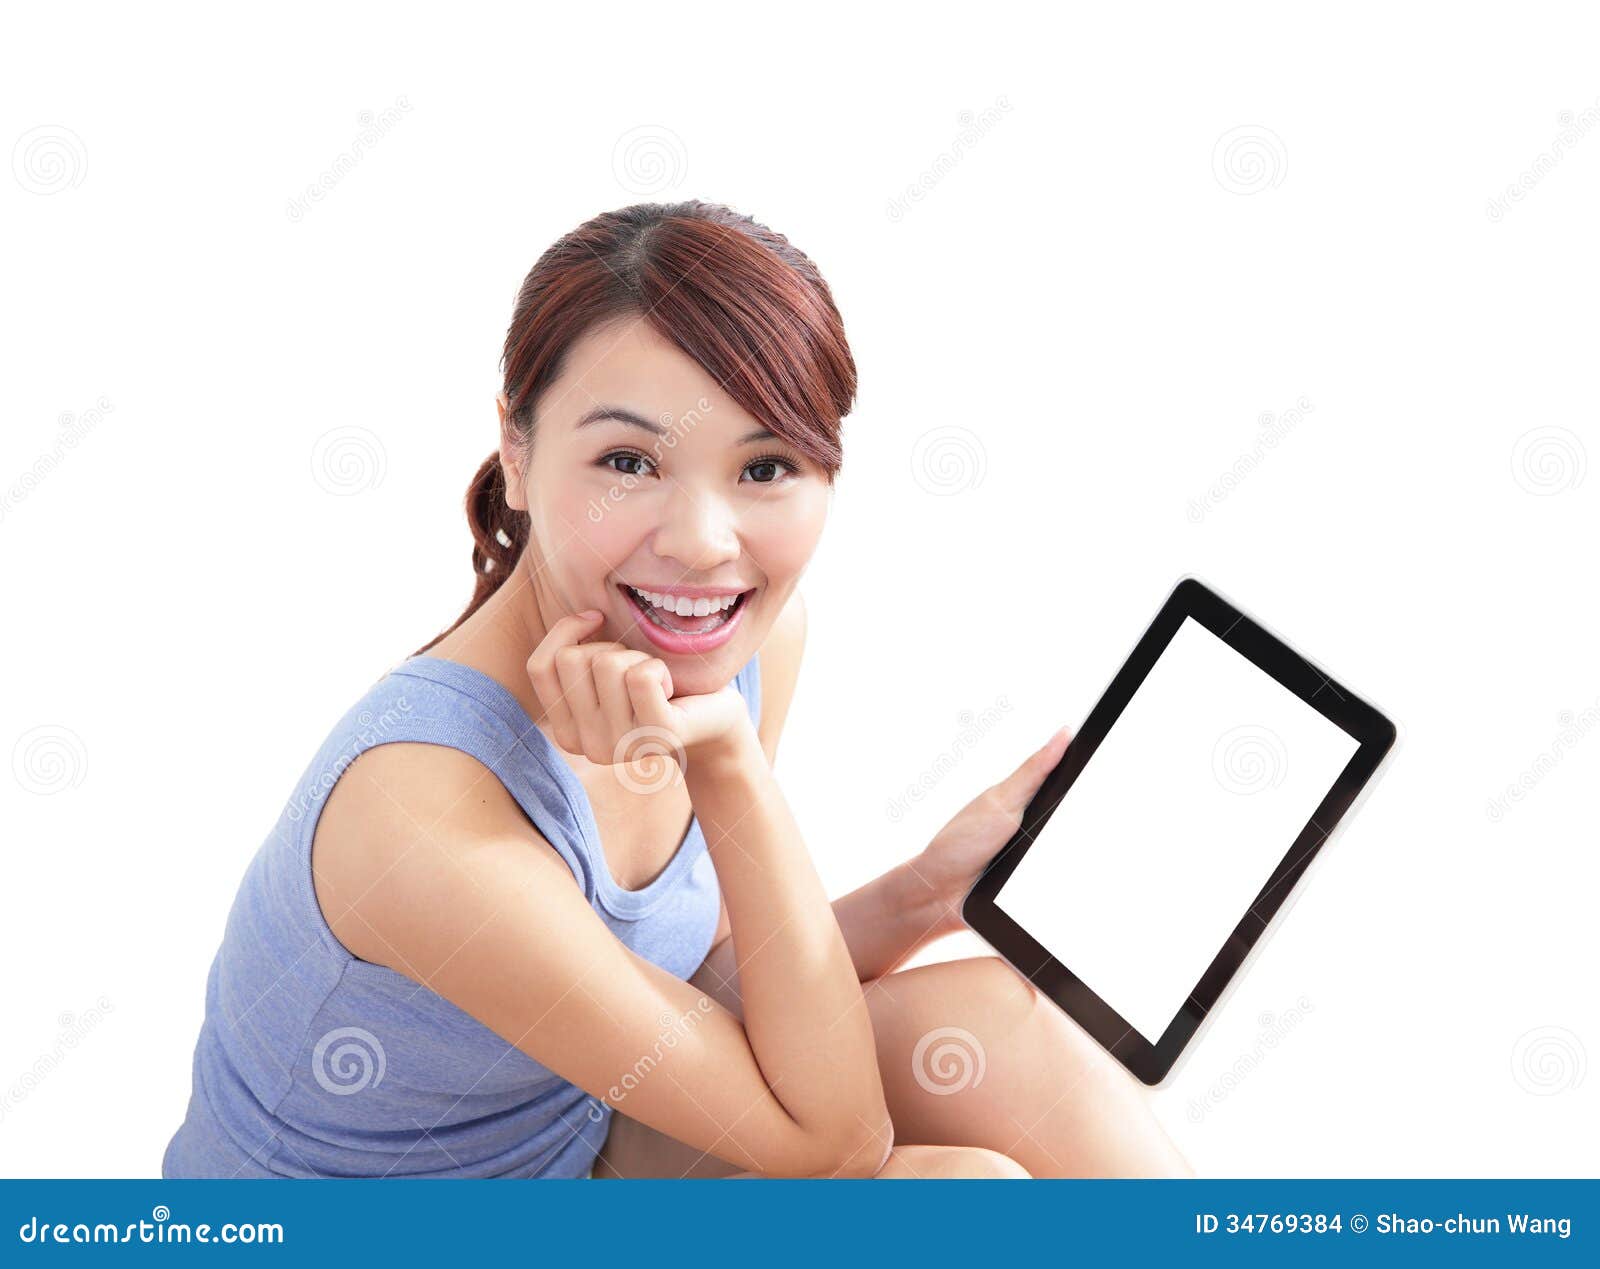 happy-woman-using-tablet-pc-isolated-white-background-empty-computer-screen-great-your-design-copy-space-asian-beauty-34769384.jpg